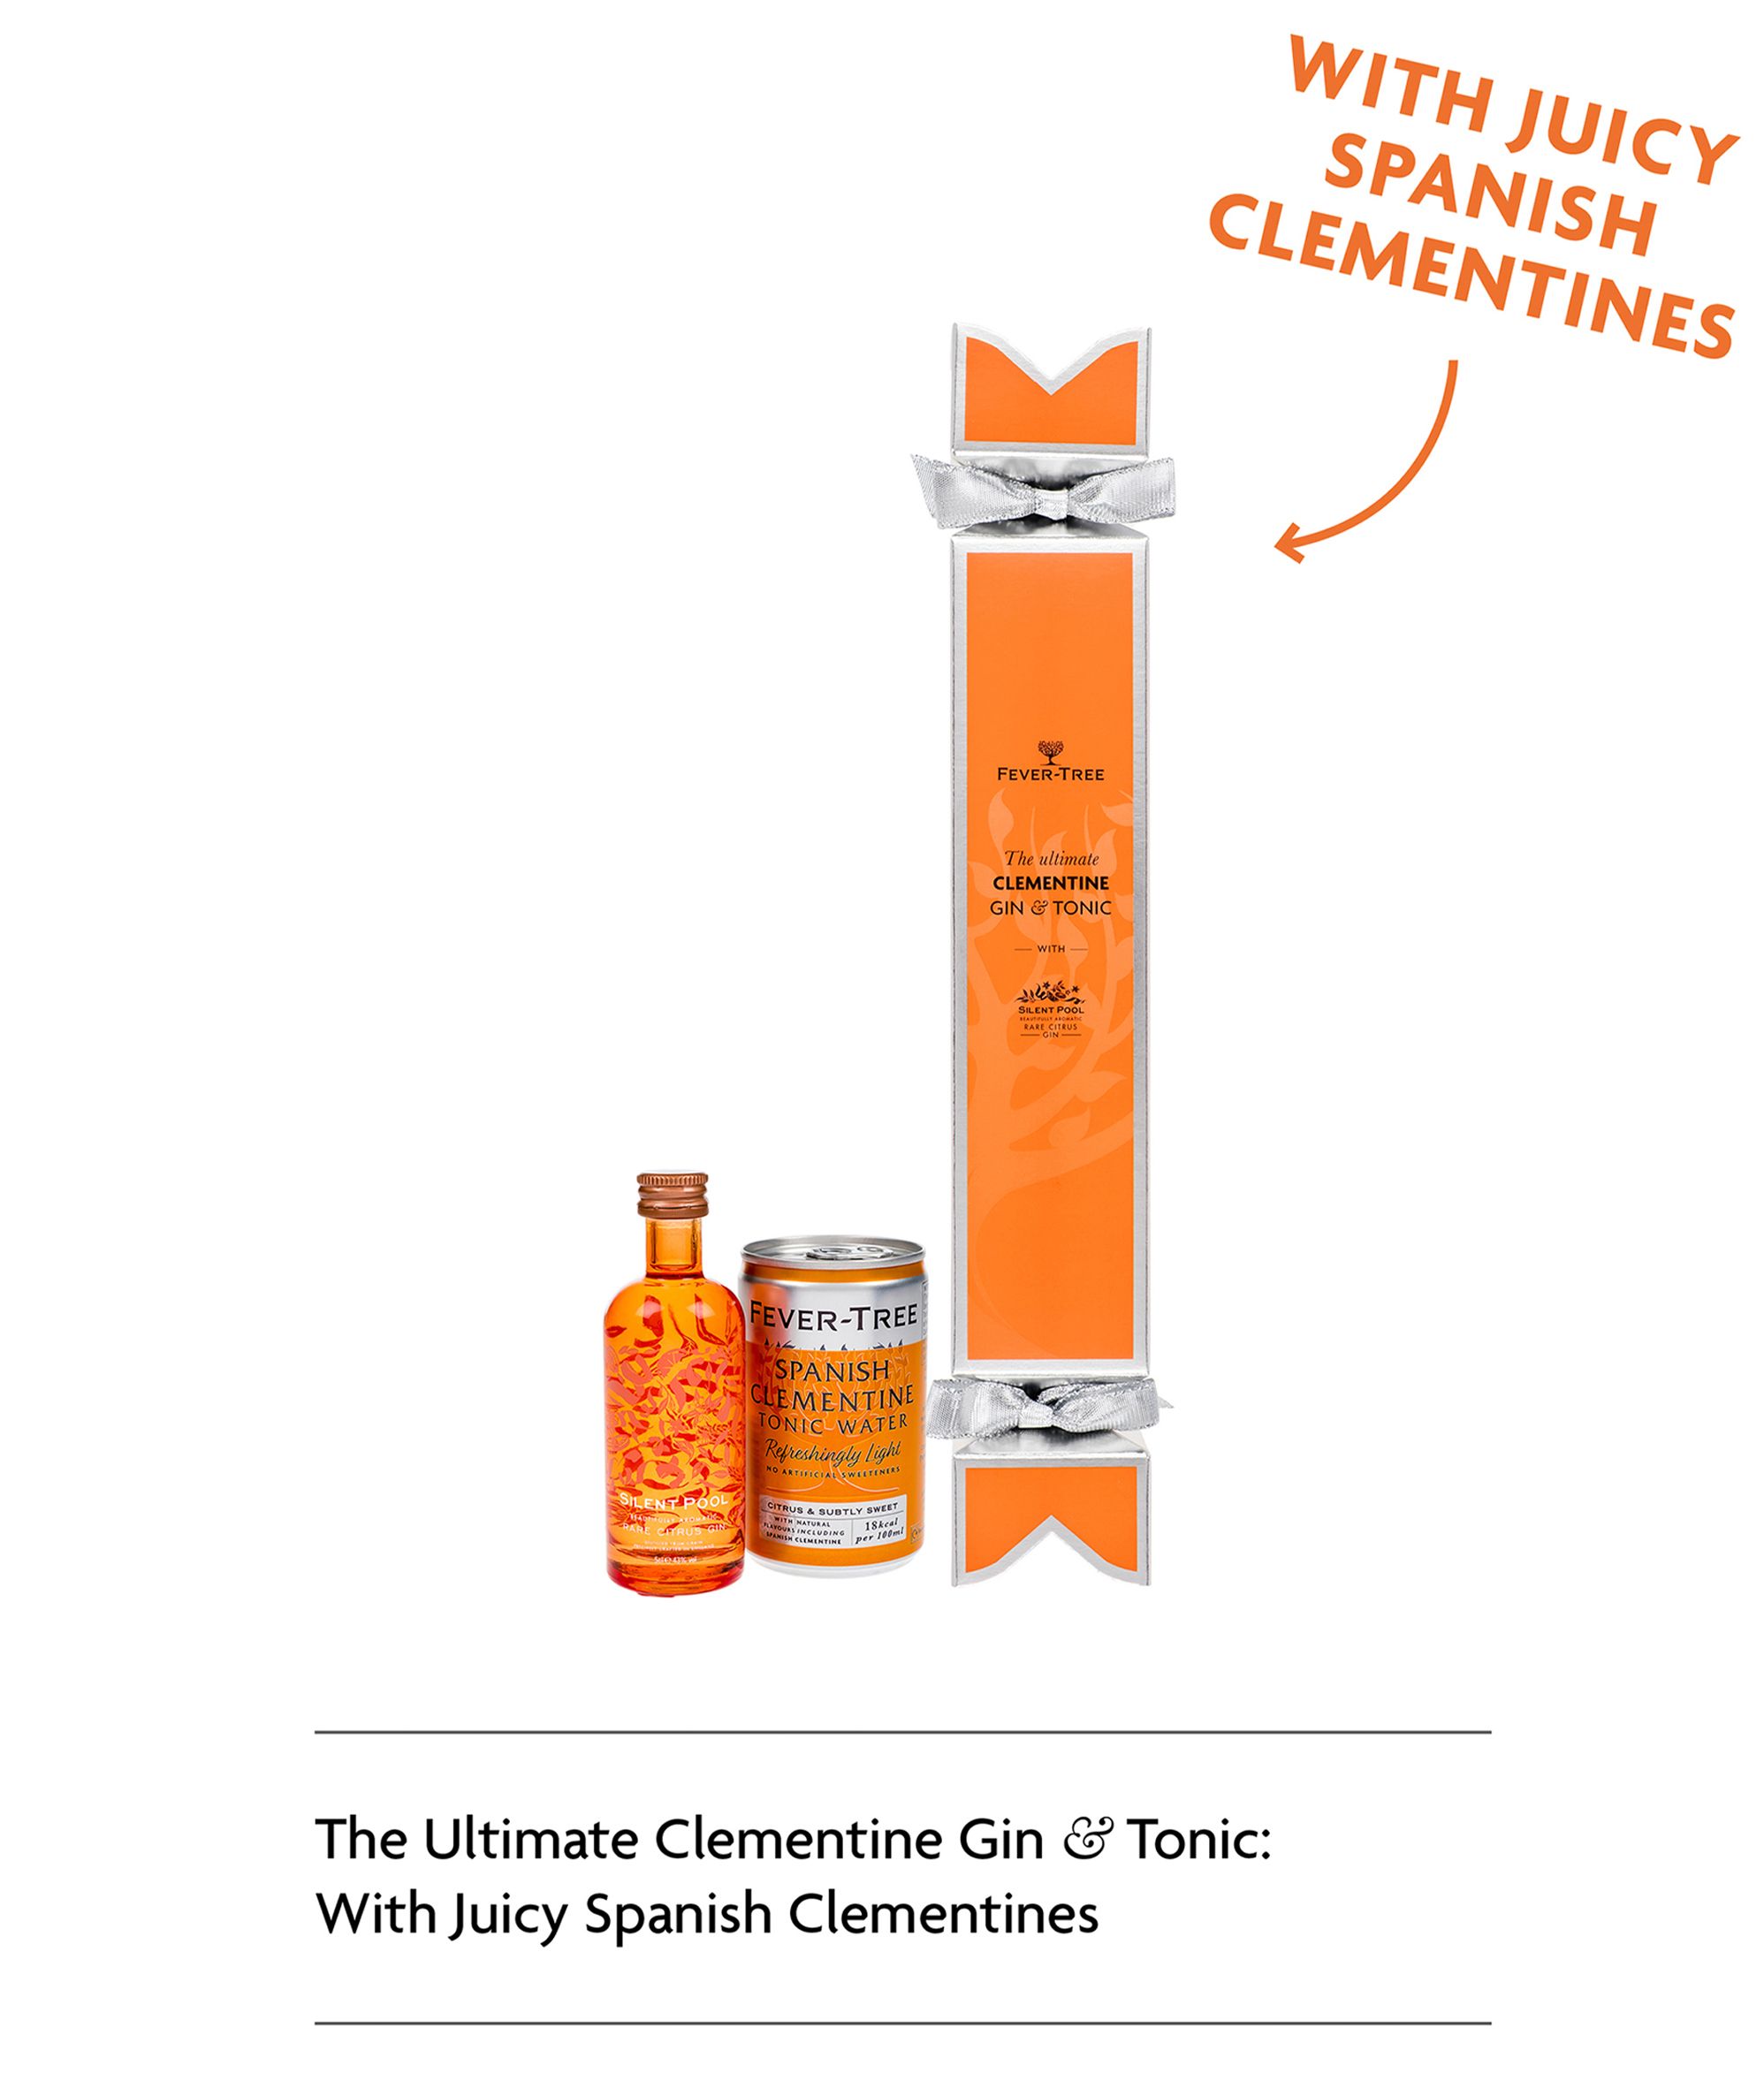 Fever Tree Clementine Gin & Tonic: With Juicy Spanish Clementines